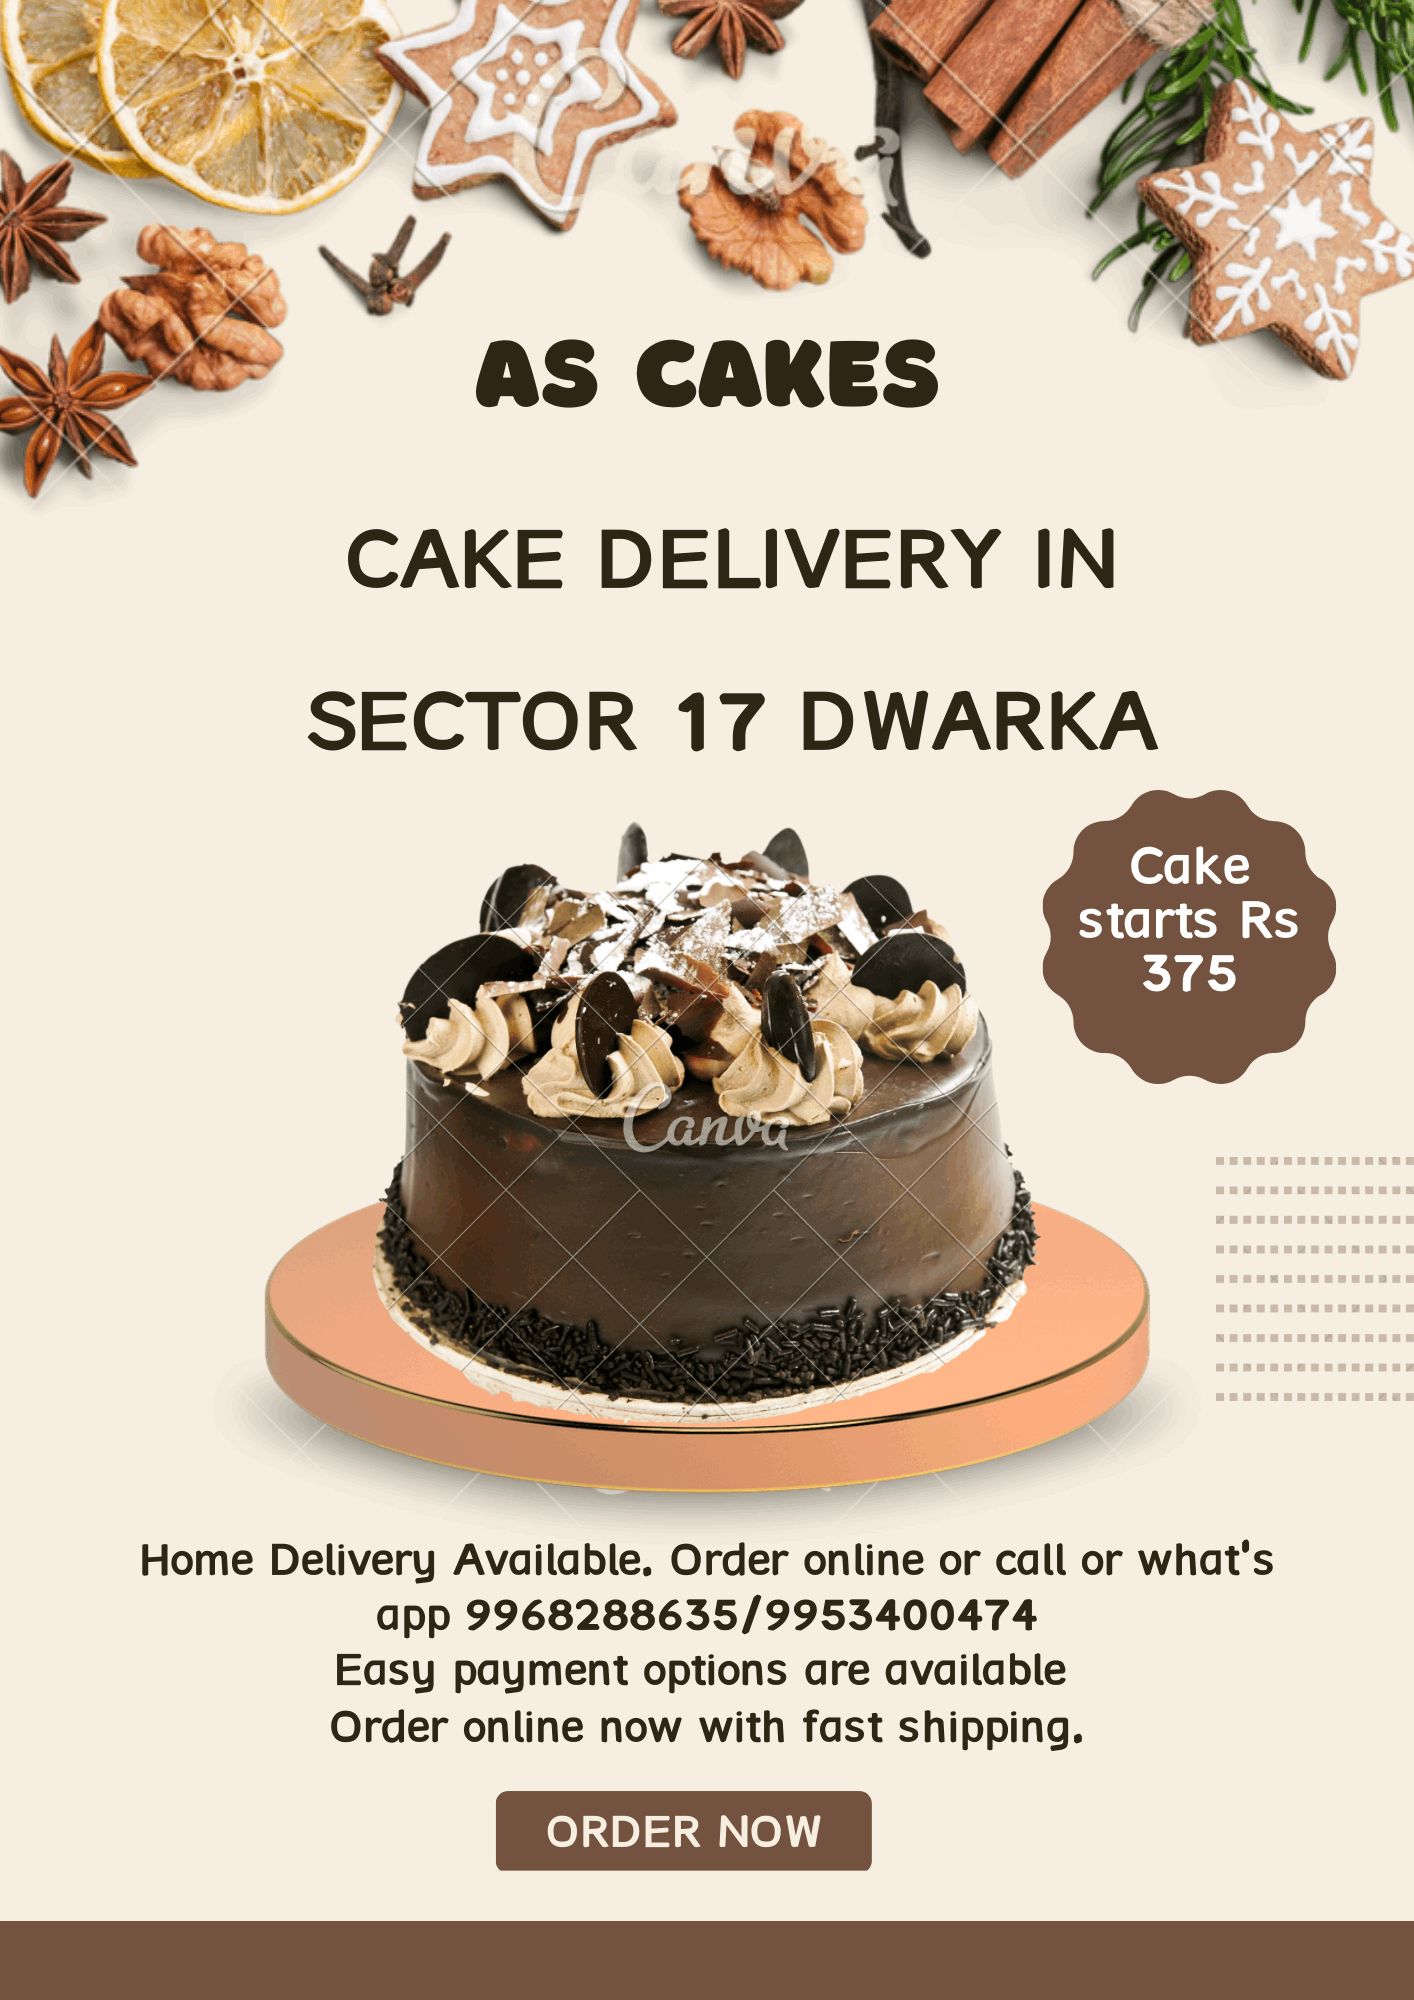 AS Cakes cake delivery in sector 17 dwarka